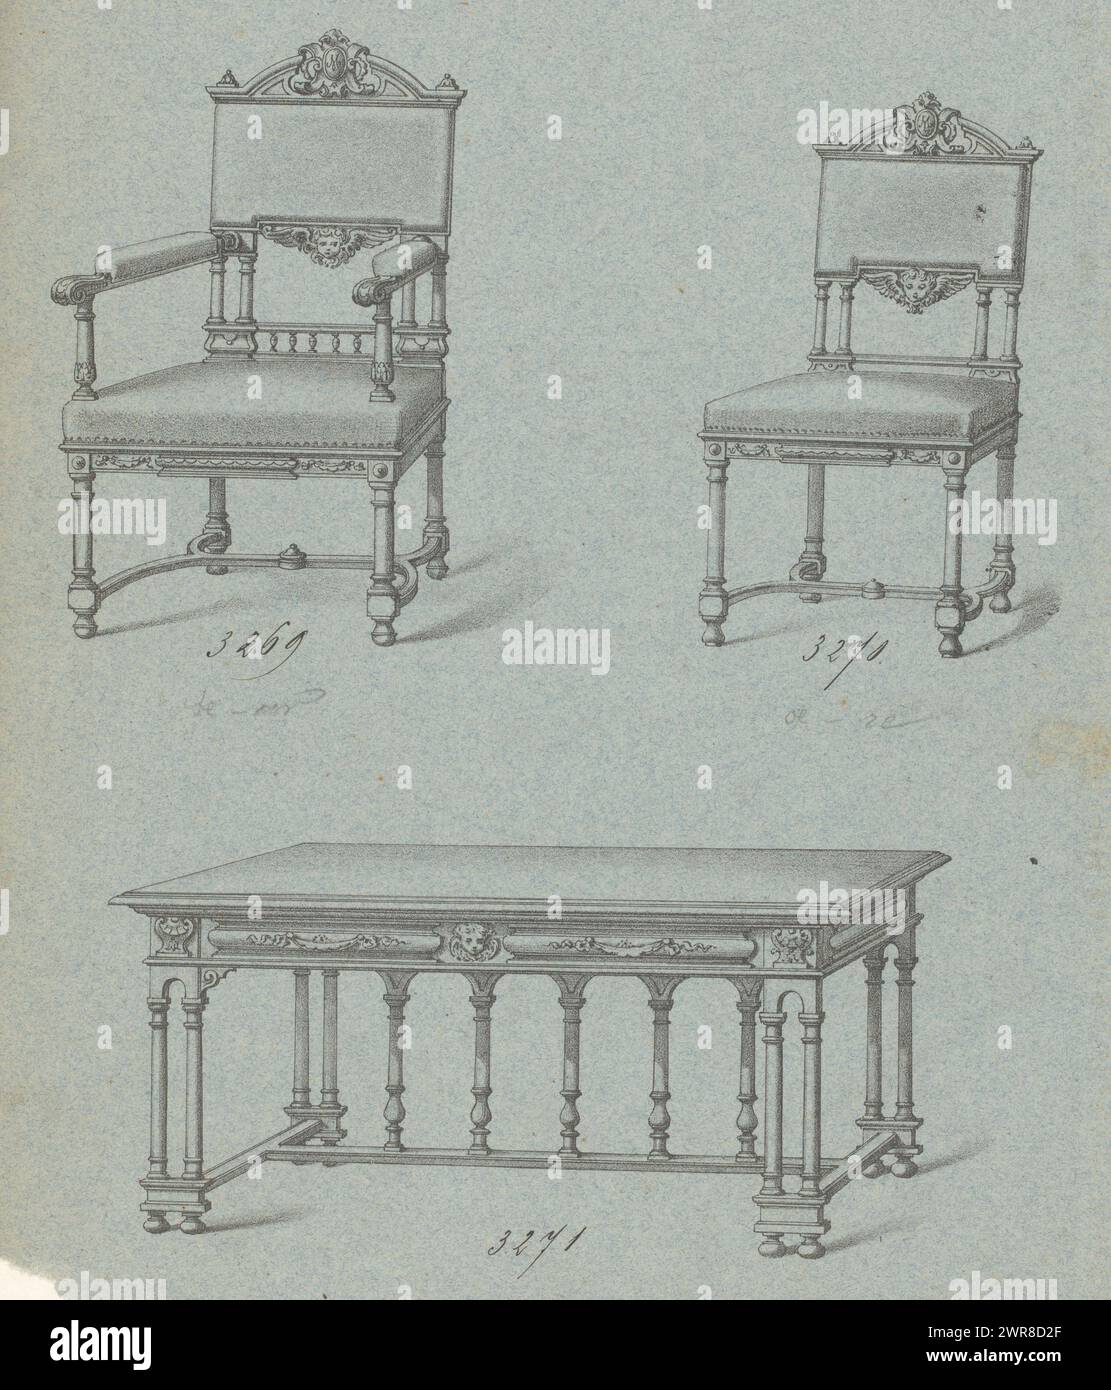 Armchair, chair and table, An armchair, chair and rectangular table., print maker: anonymous, France, 1800 - 1900, paper, height 334 mm × width 262 mm, print Stock Photo